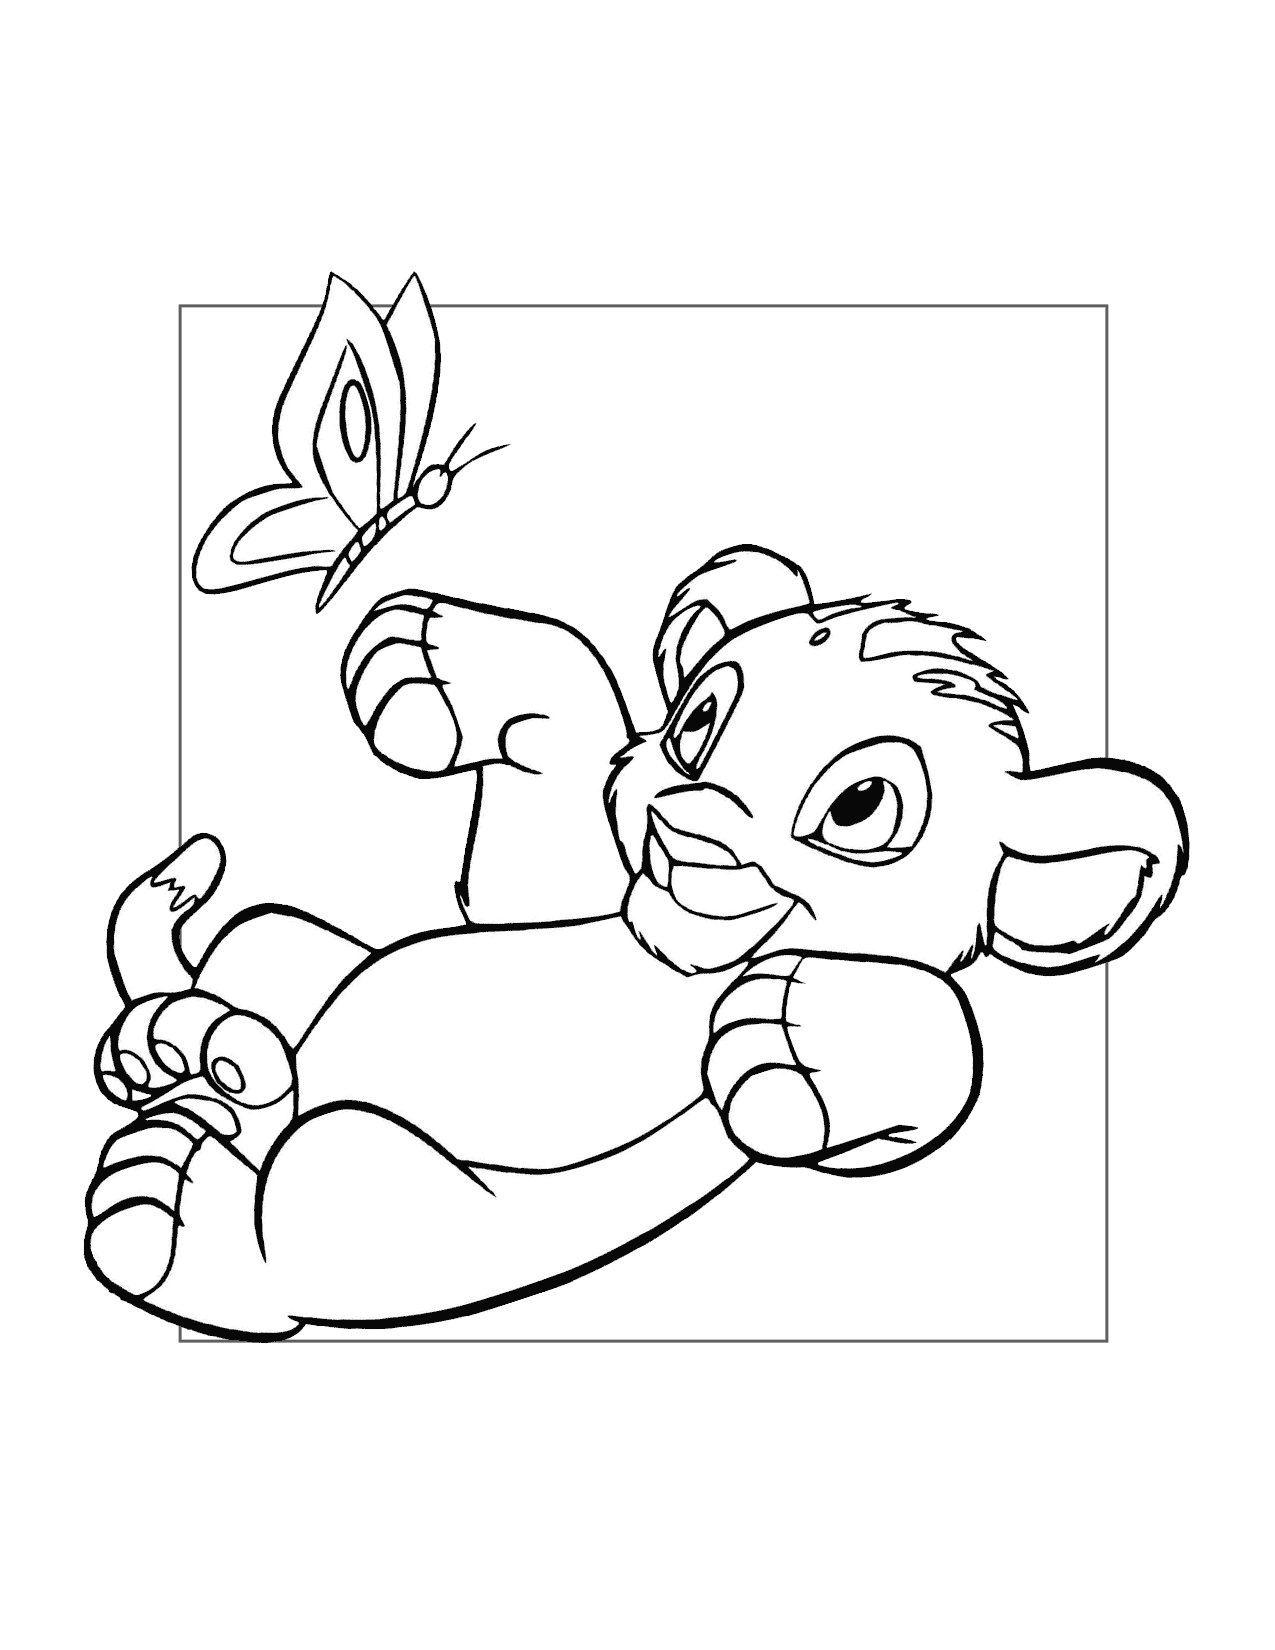 Simba Plays With A Butterfly Coloring Page